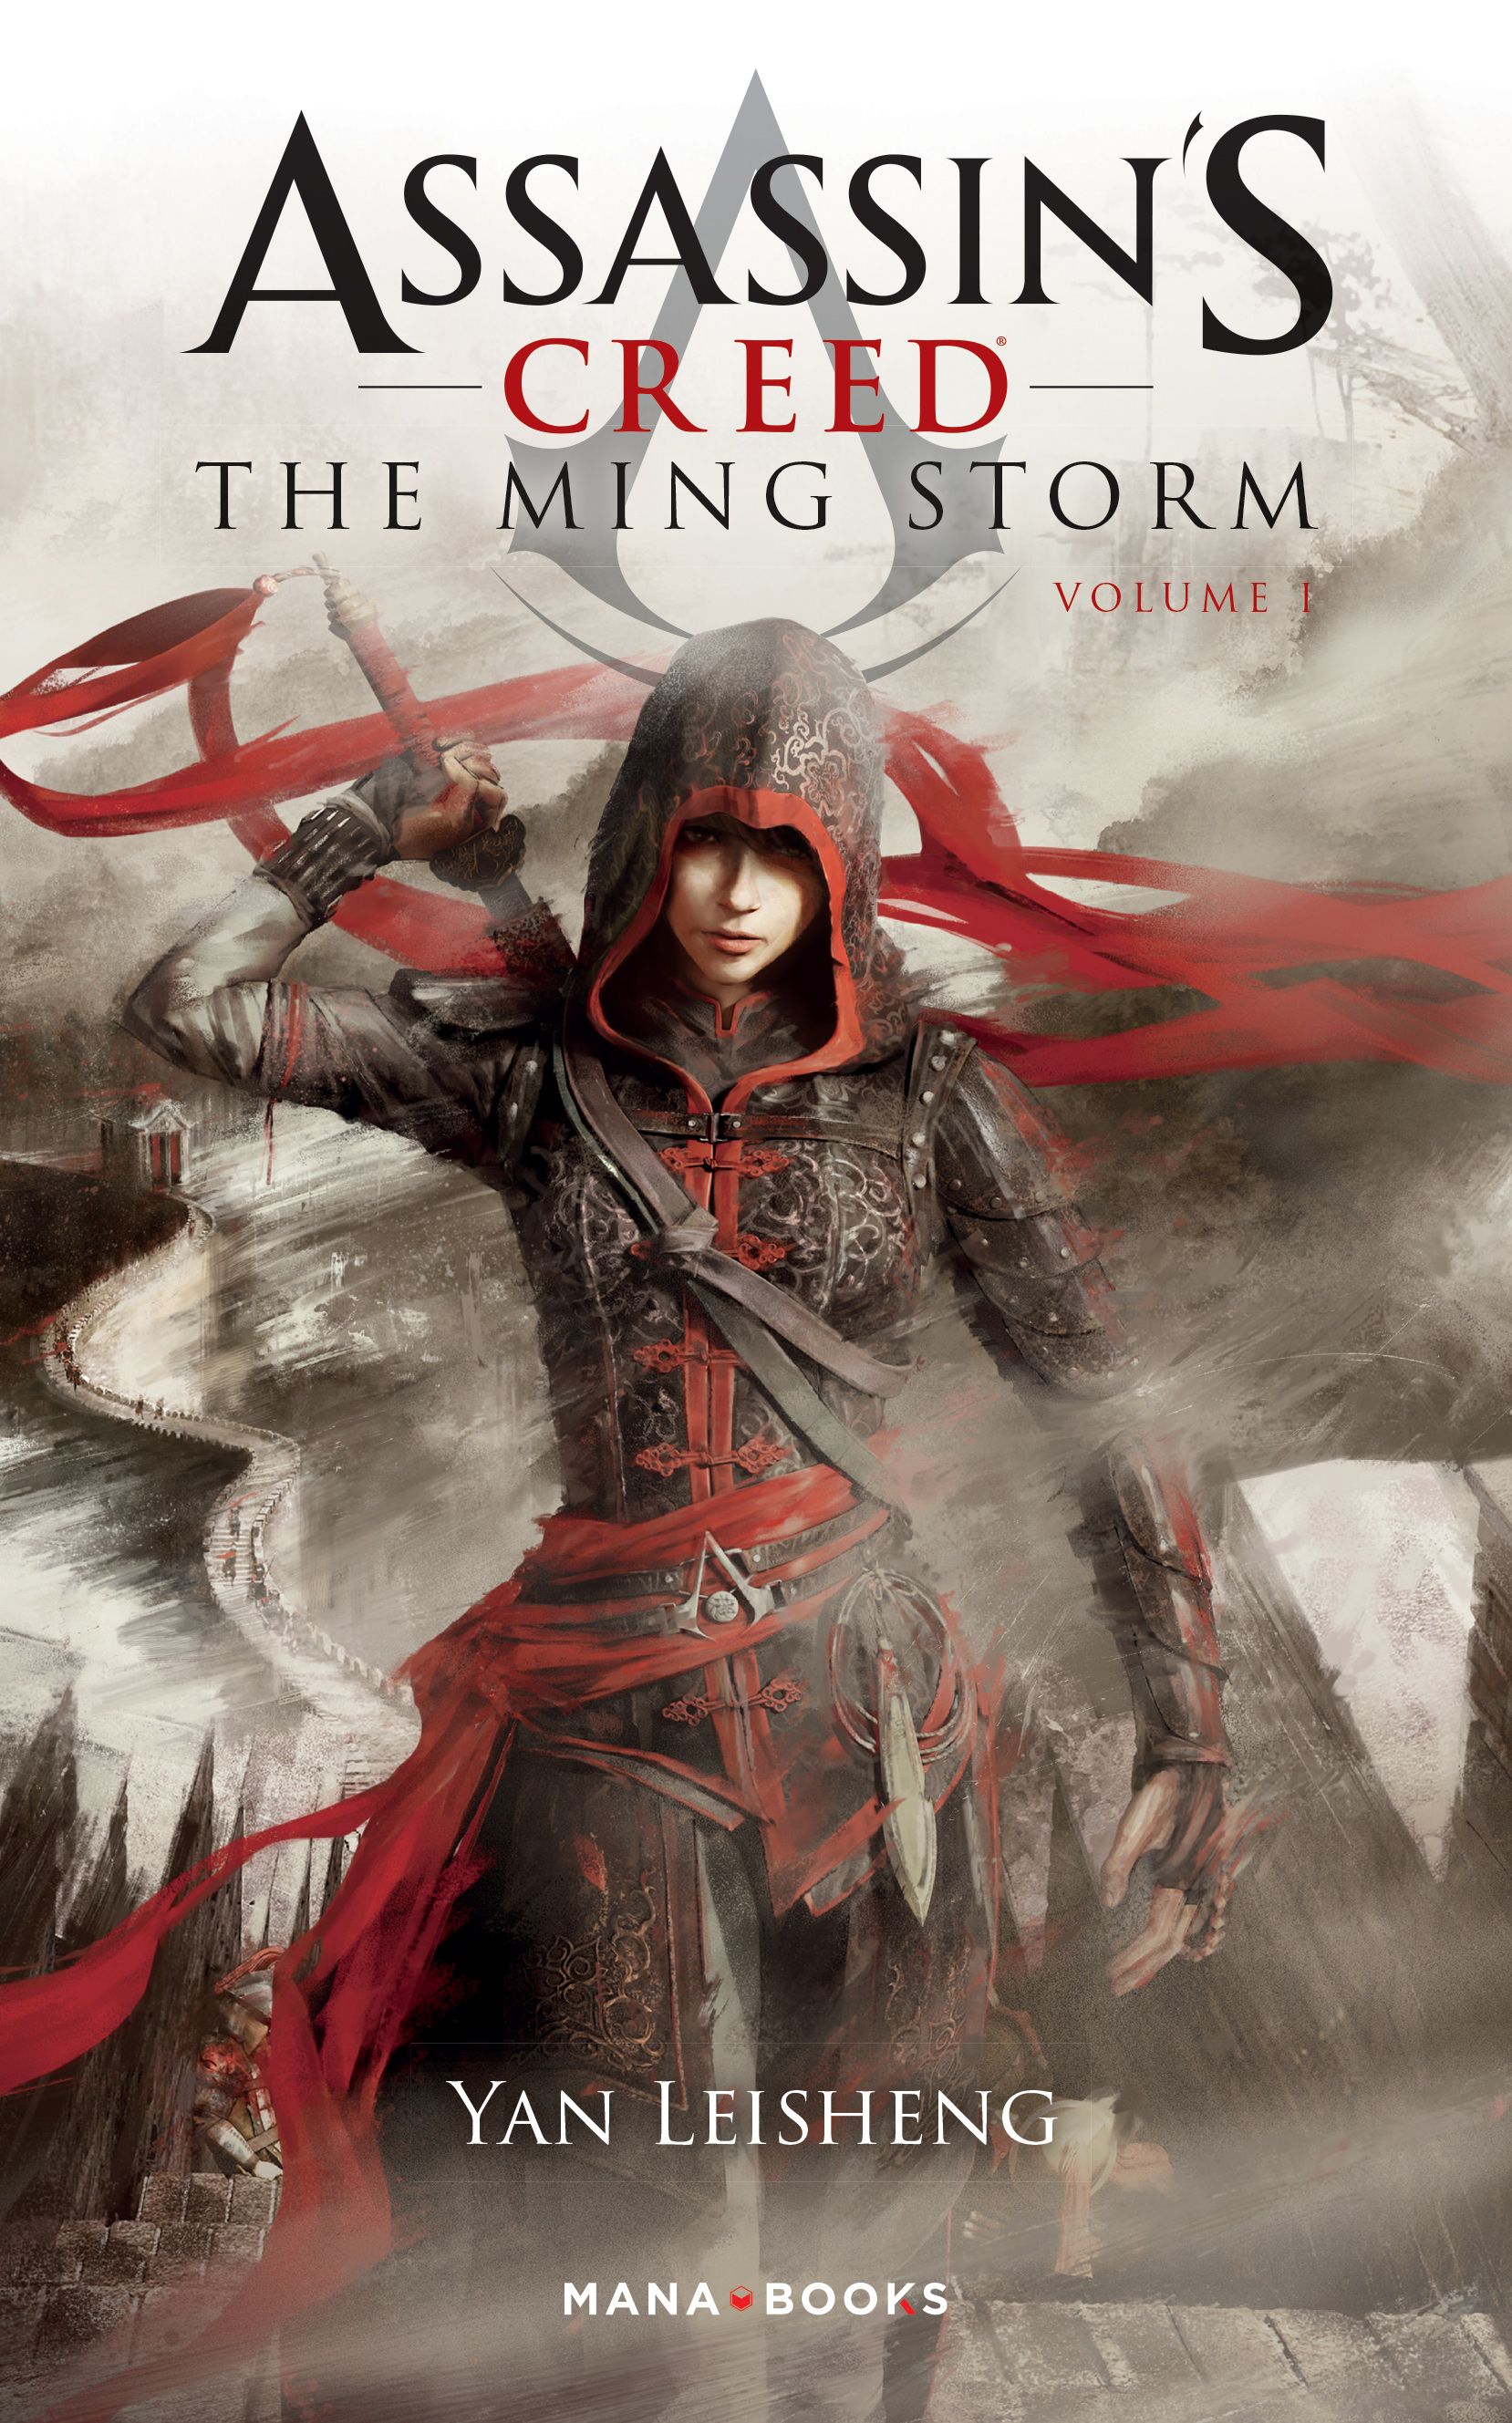 Assassin's Creed - The Ming Storm Vol.1